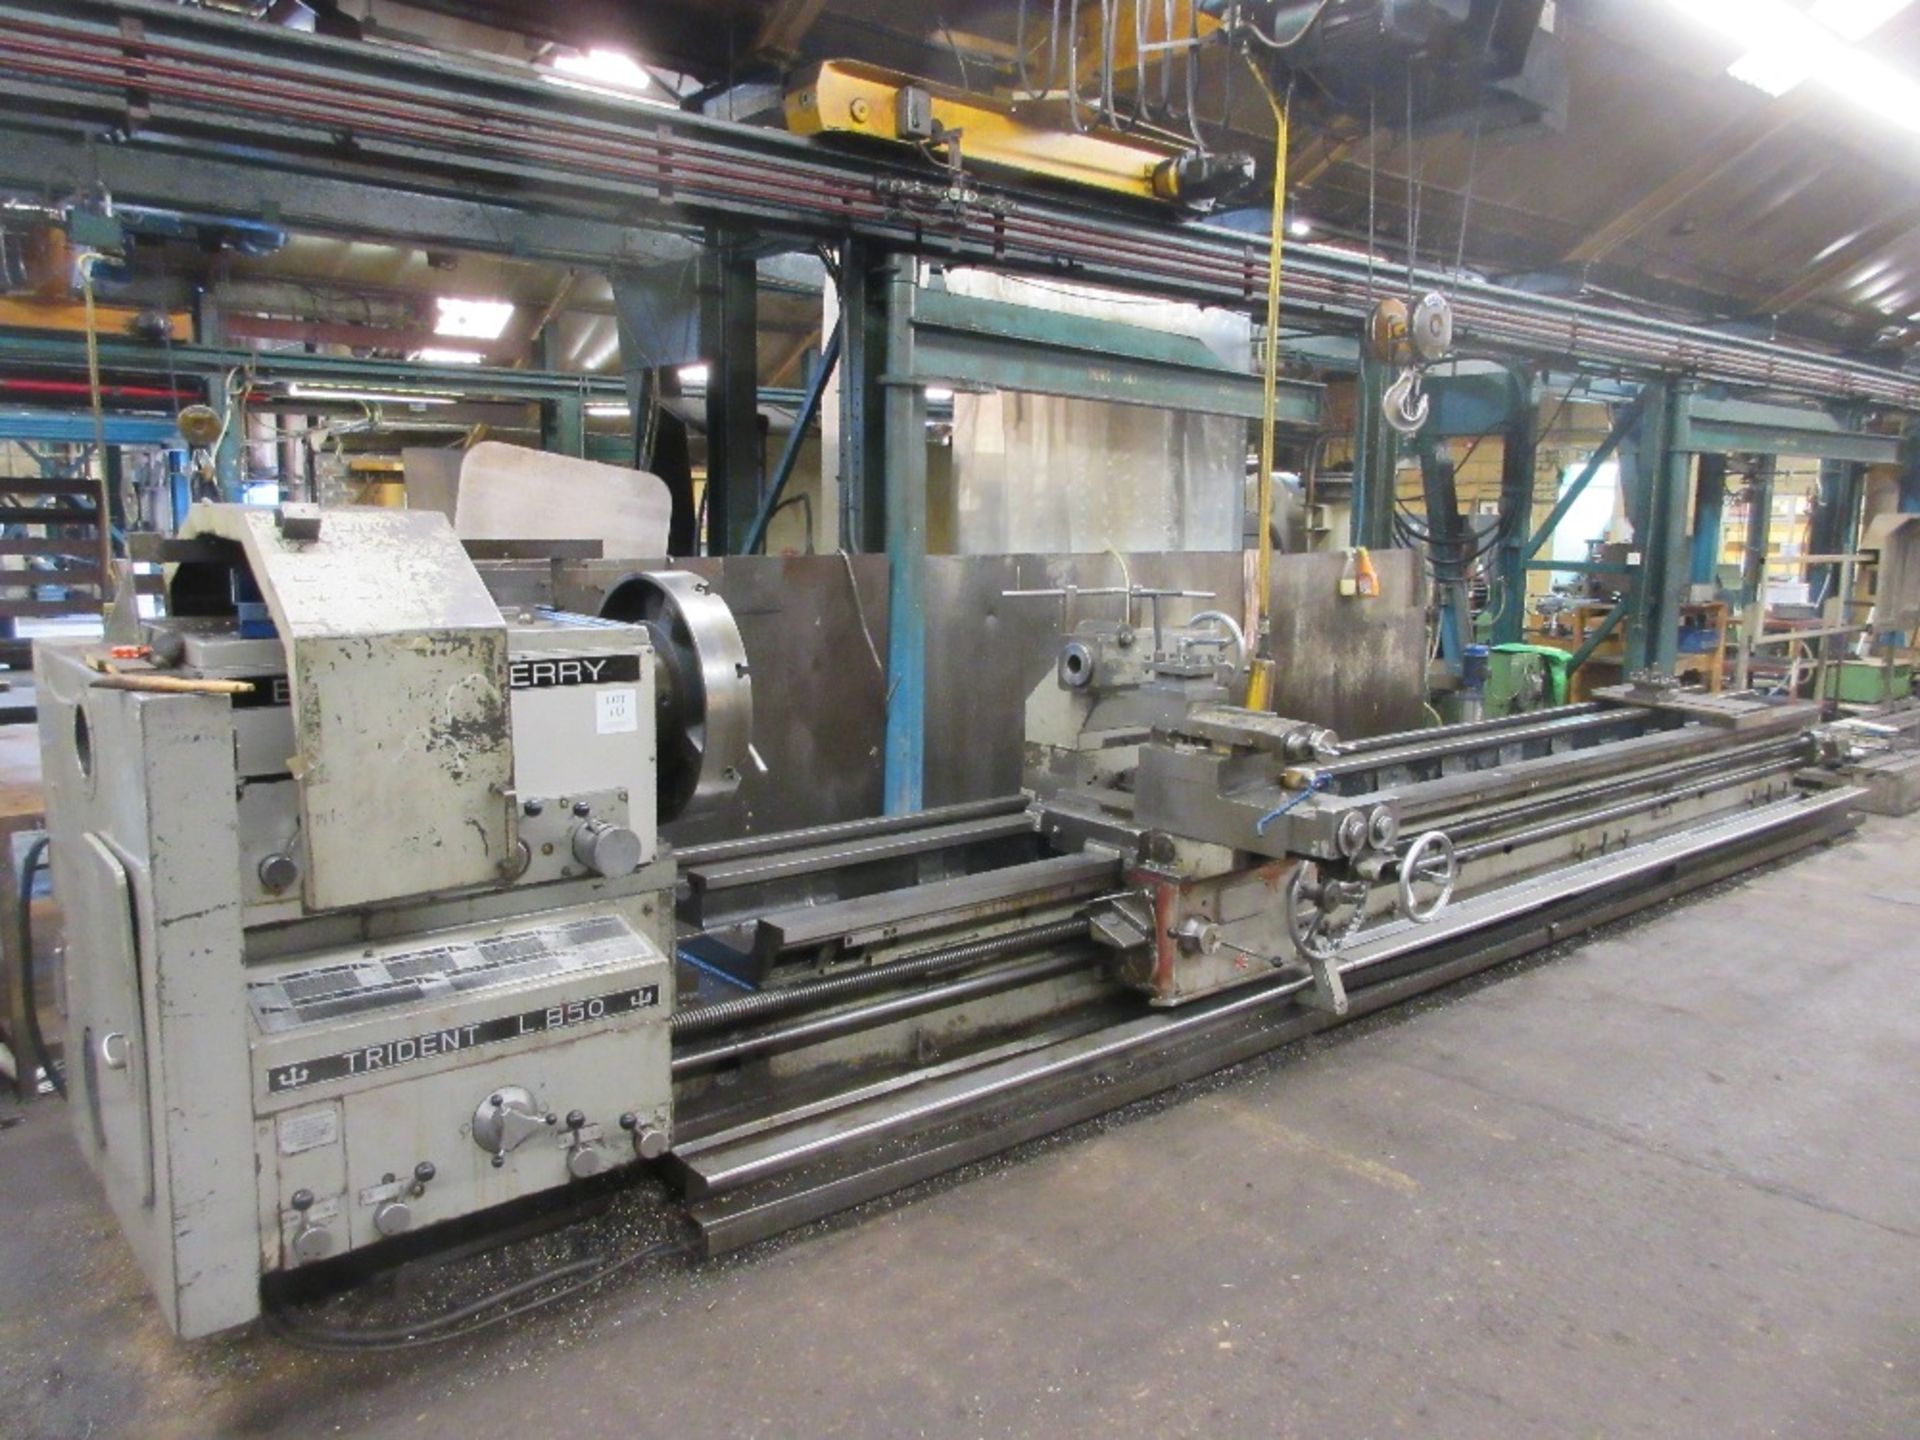 Binns & Berry Trident L850 centre lathe 40" swing x 20ft between centre. Serial No. 61602. YOM